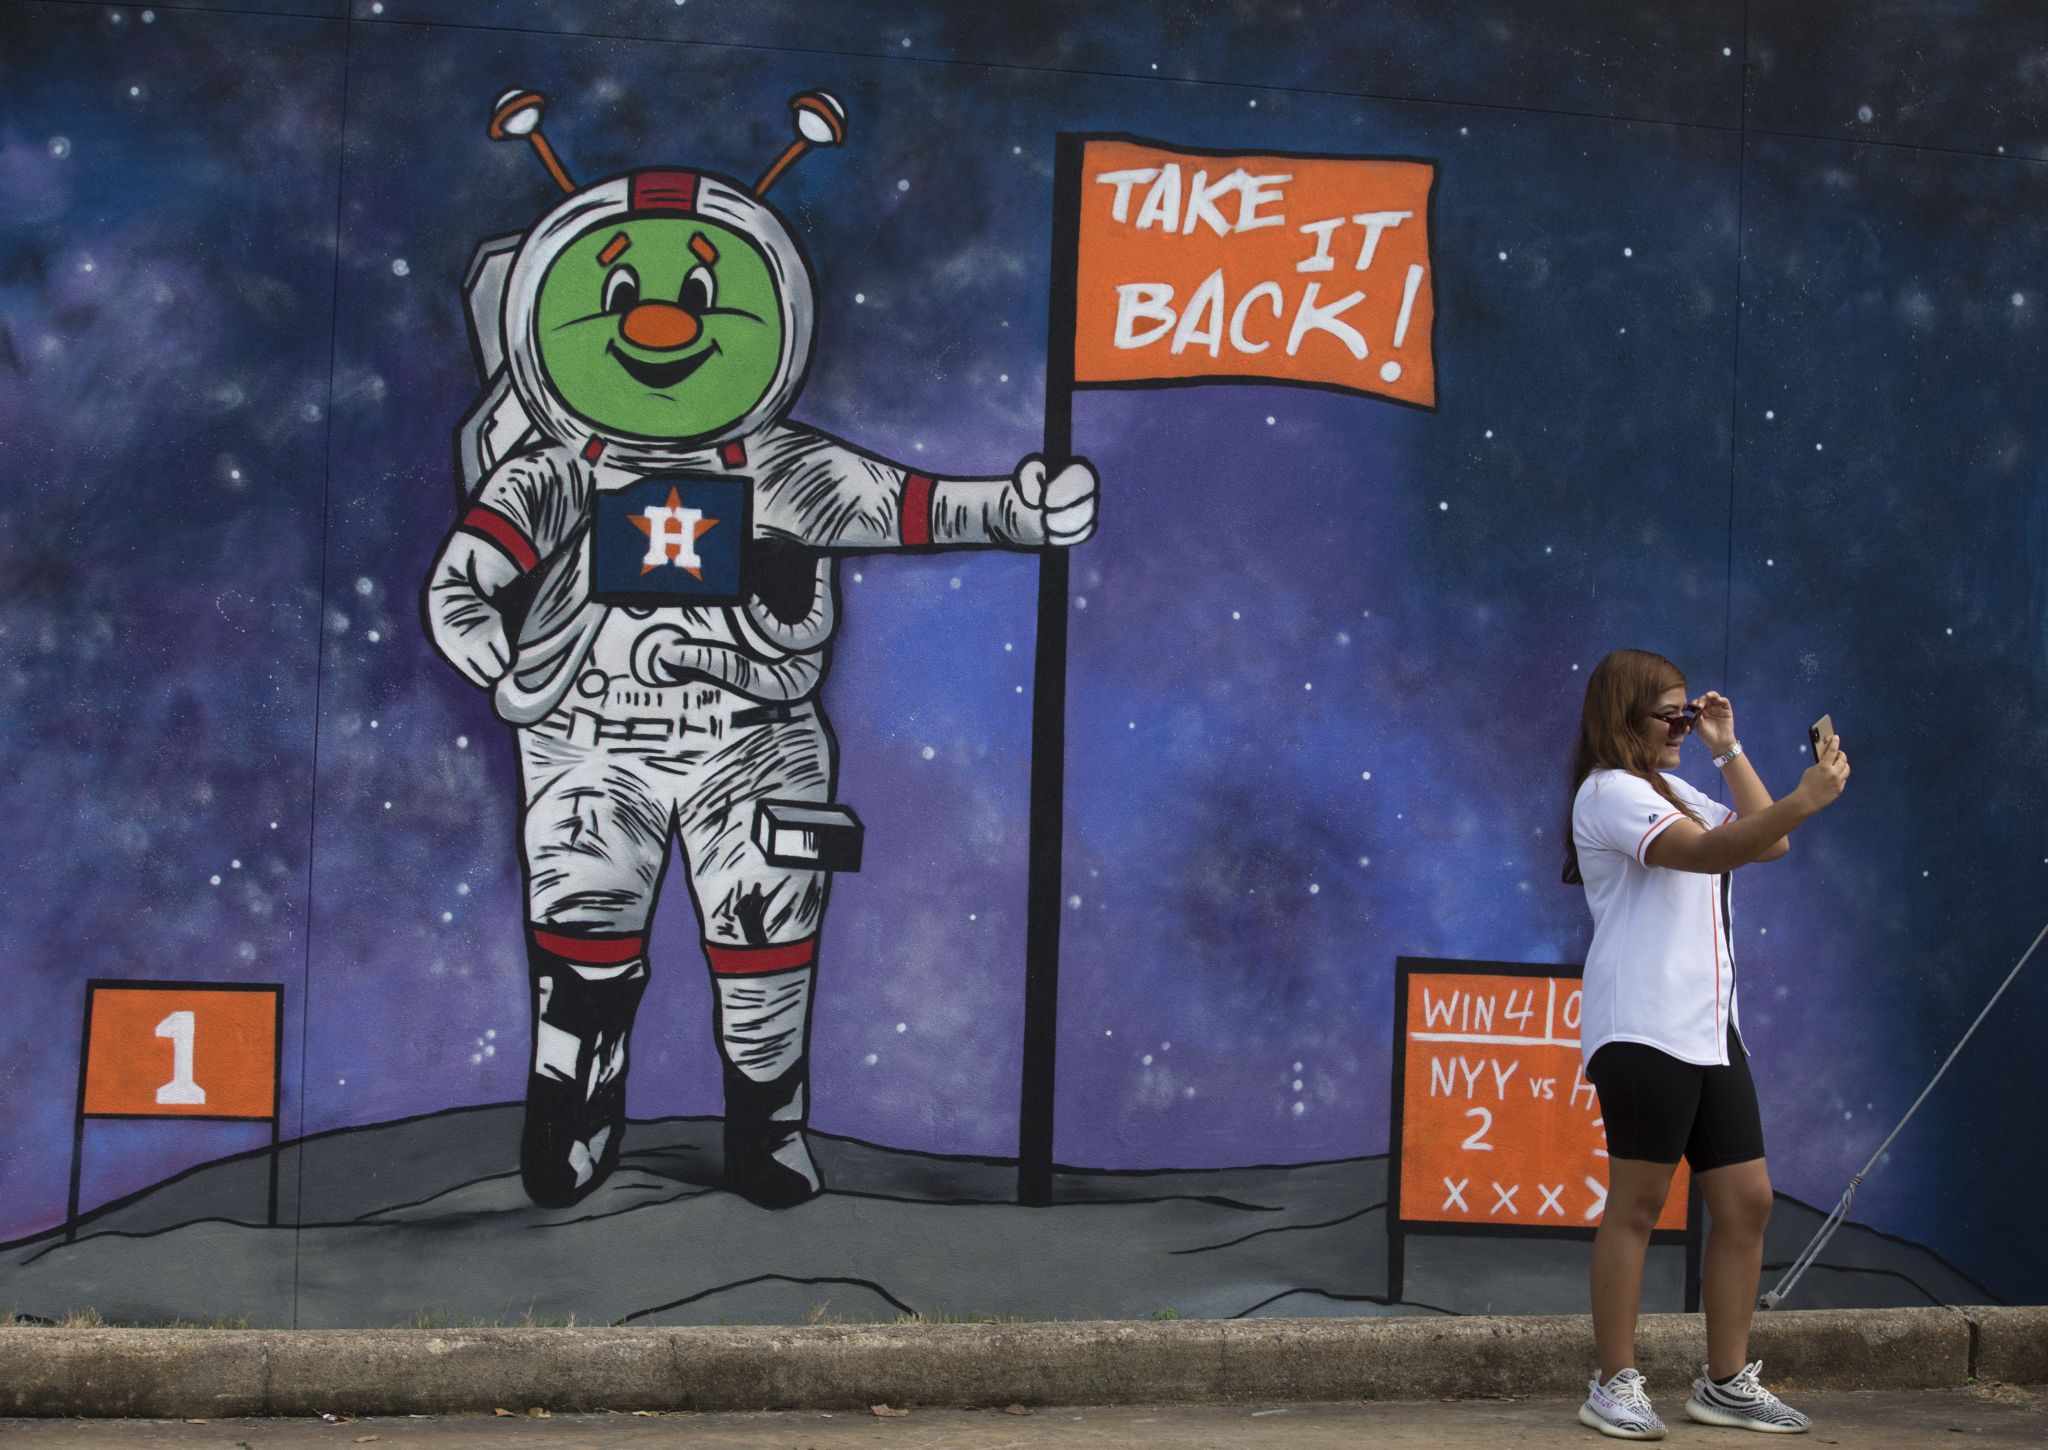 Where to Find the 2019 Houston Astros Postseason Murals – It's Not